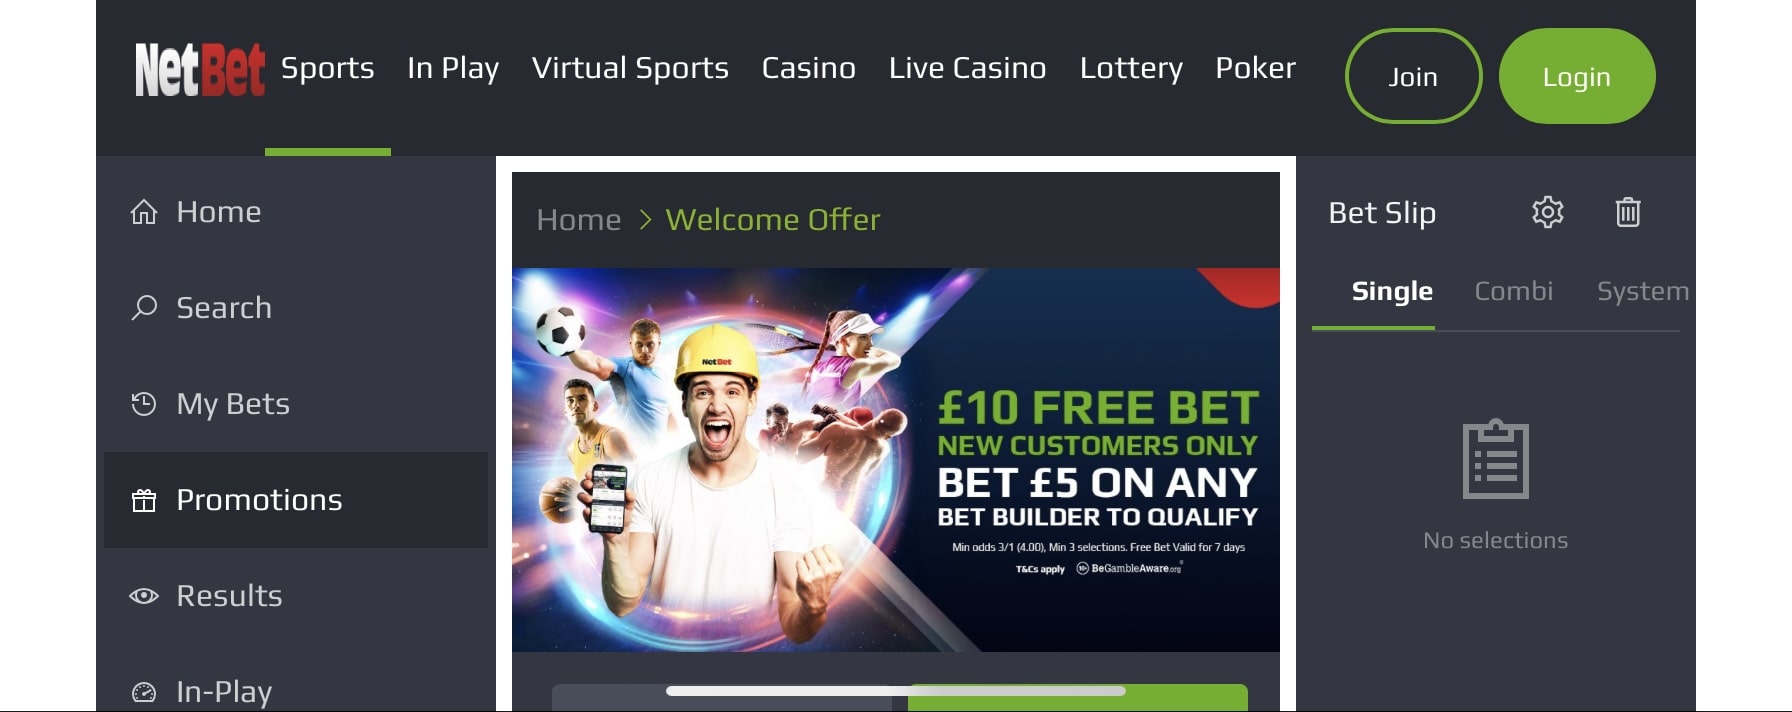 NetBet Free Bet Welcome Offer